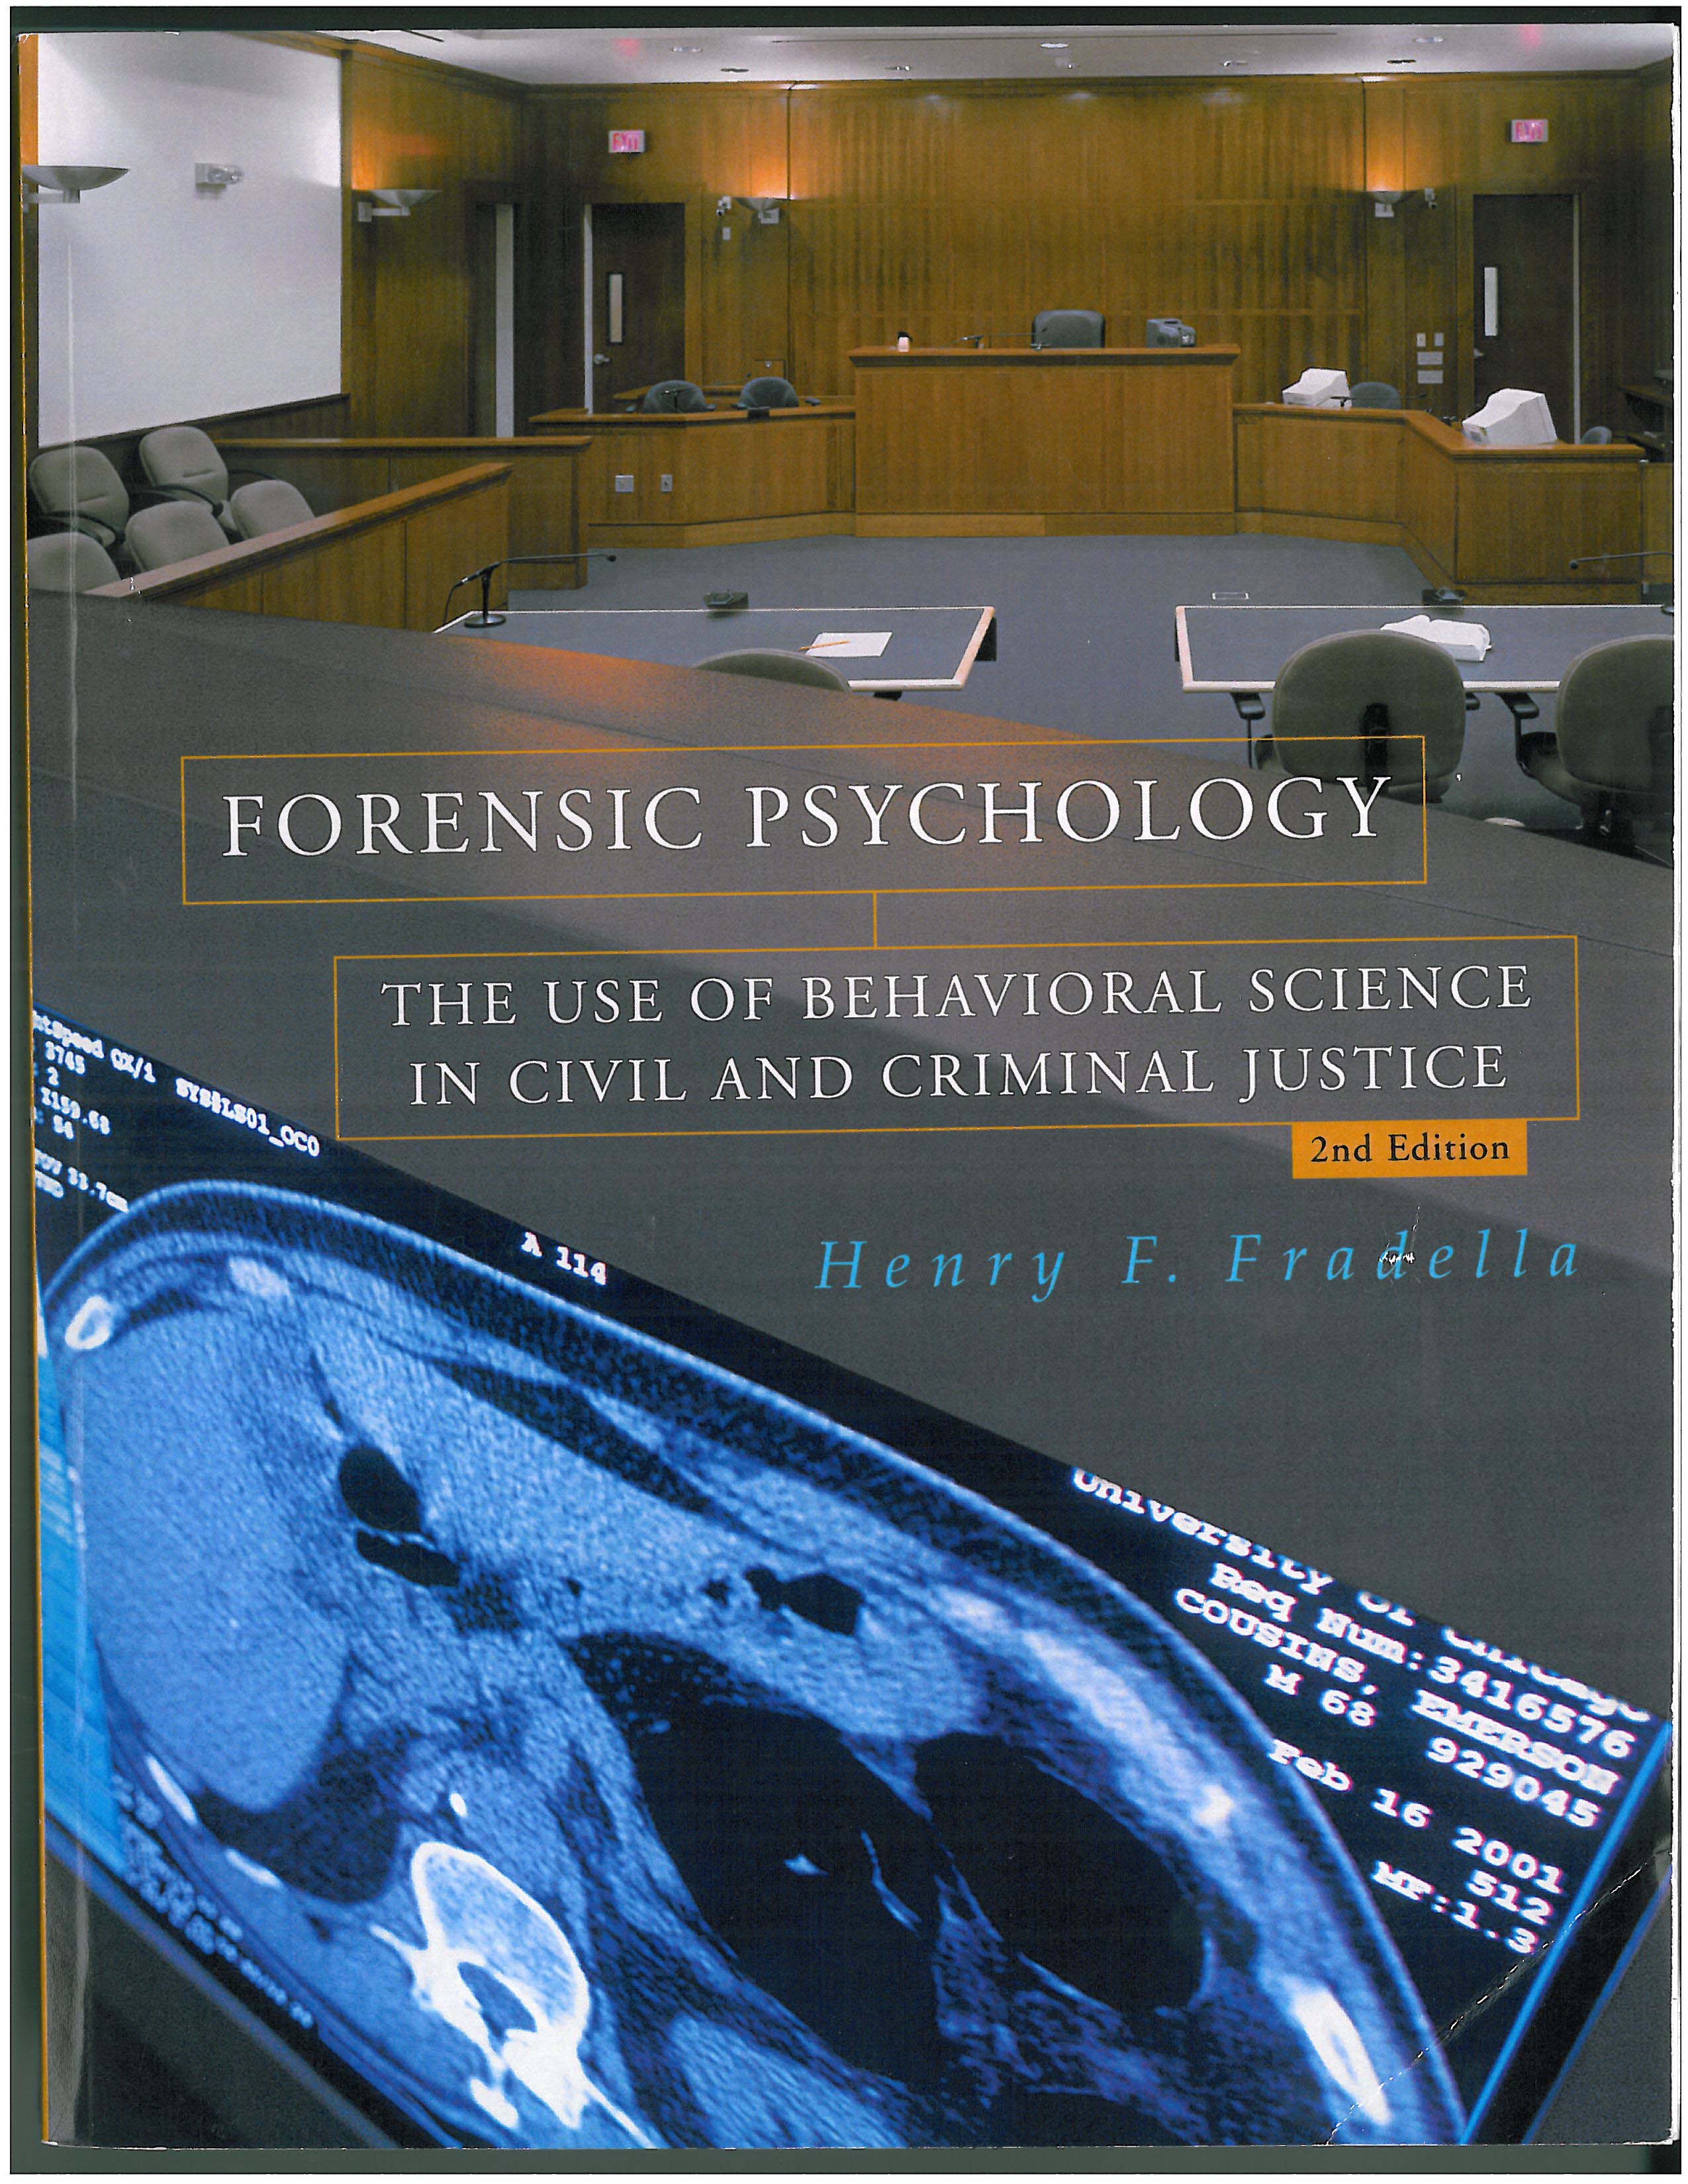 Book cover - Forensic Psychology: The Use of Behavioral Science in Civil and Criminal Justice